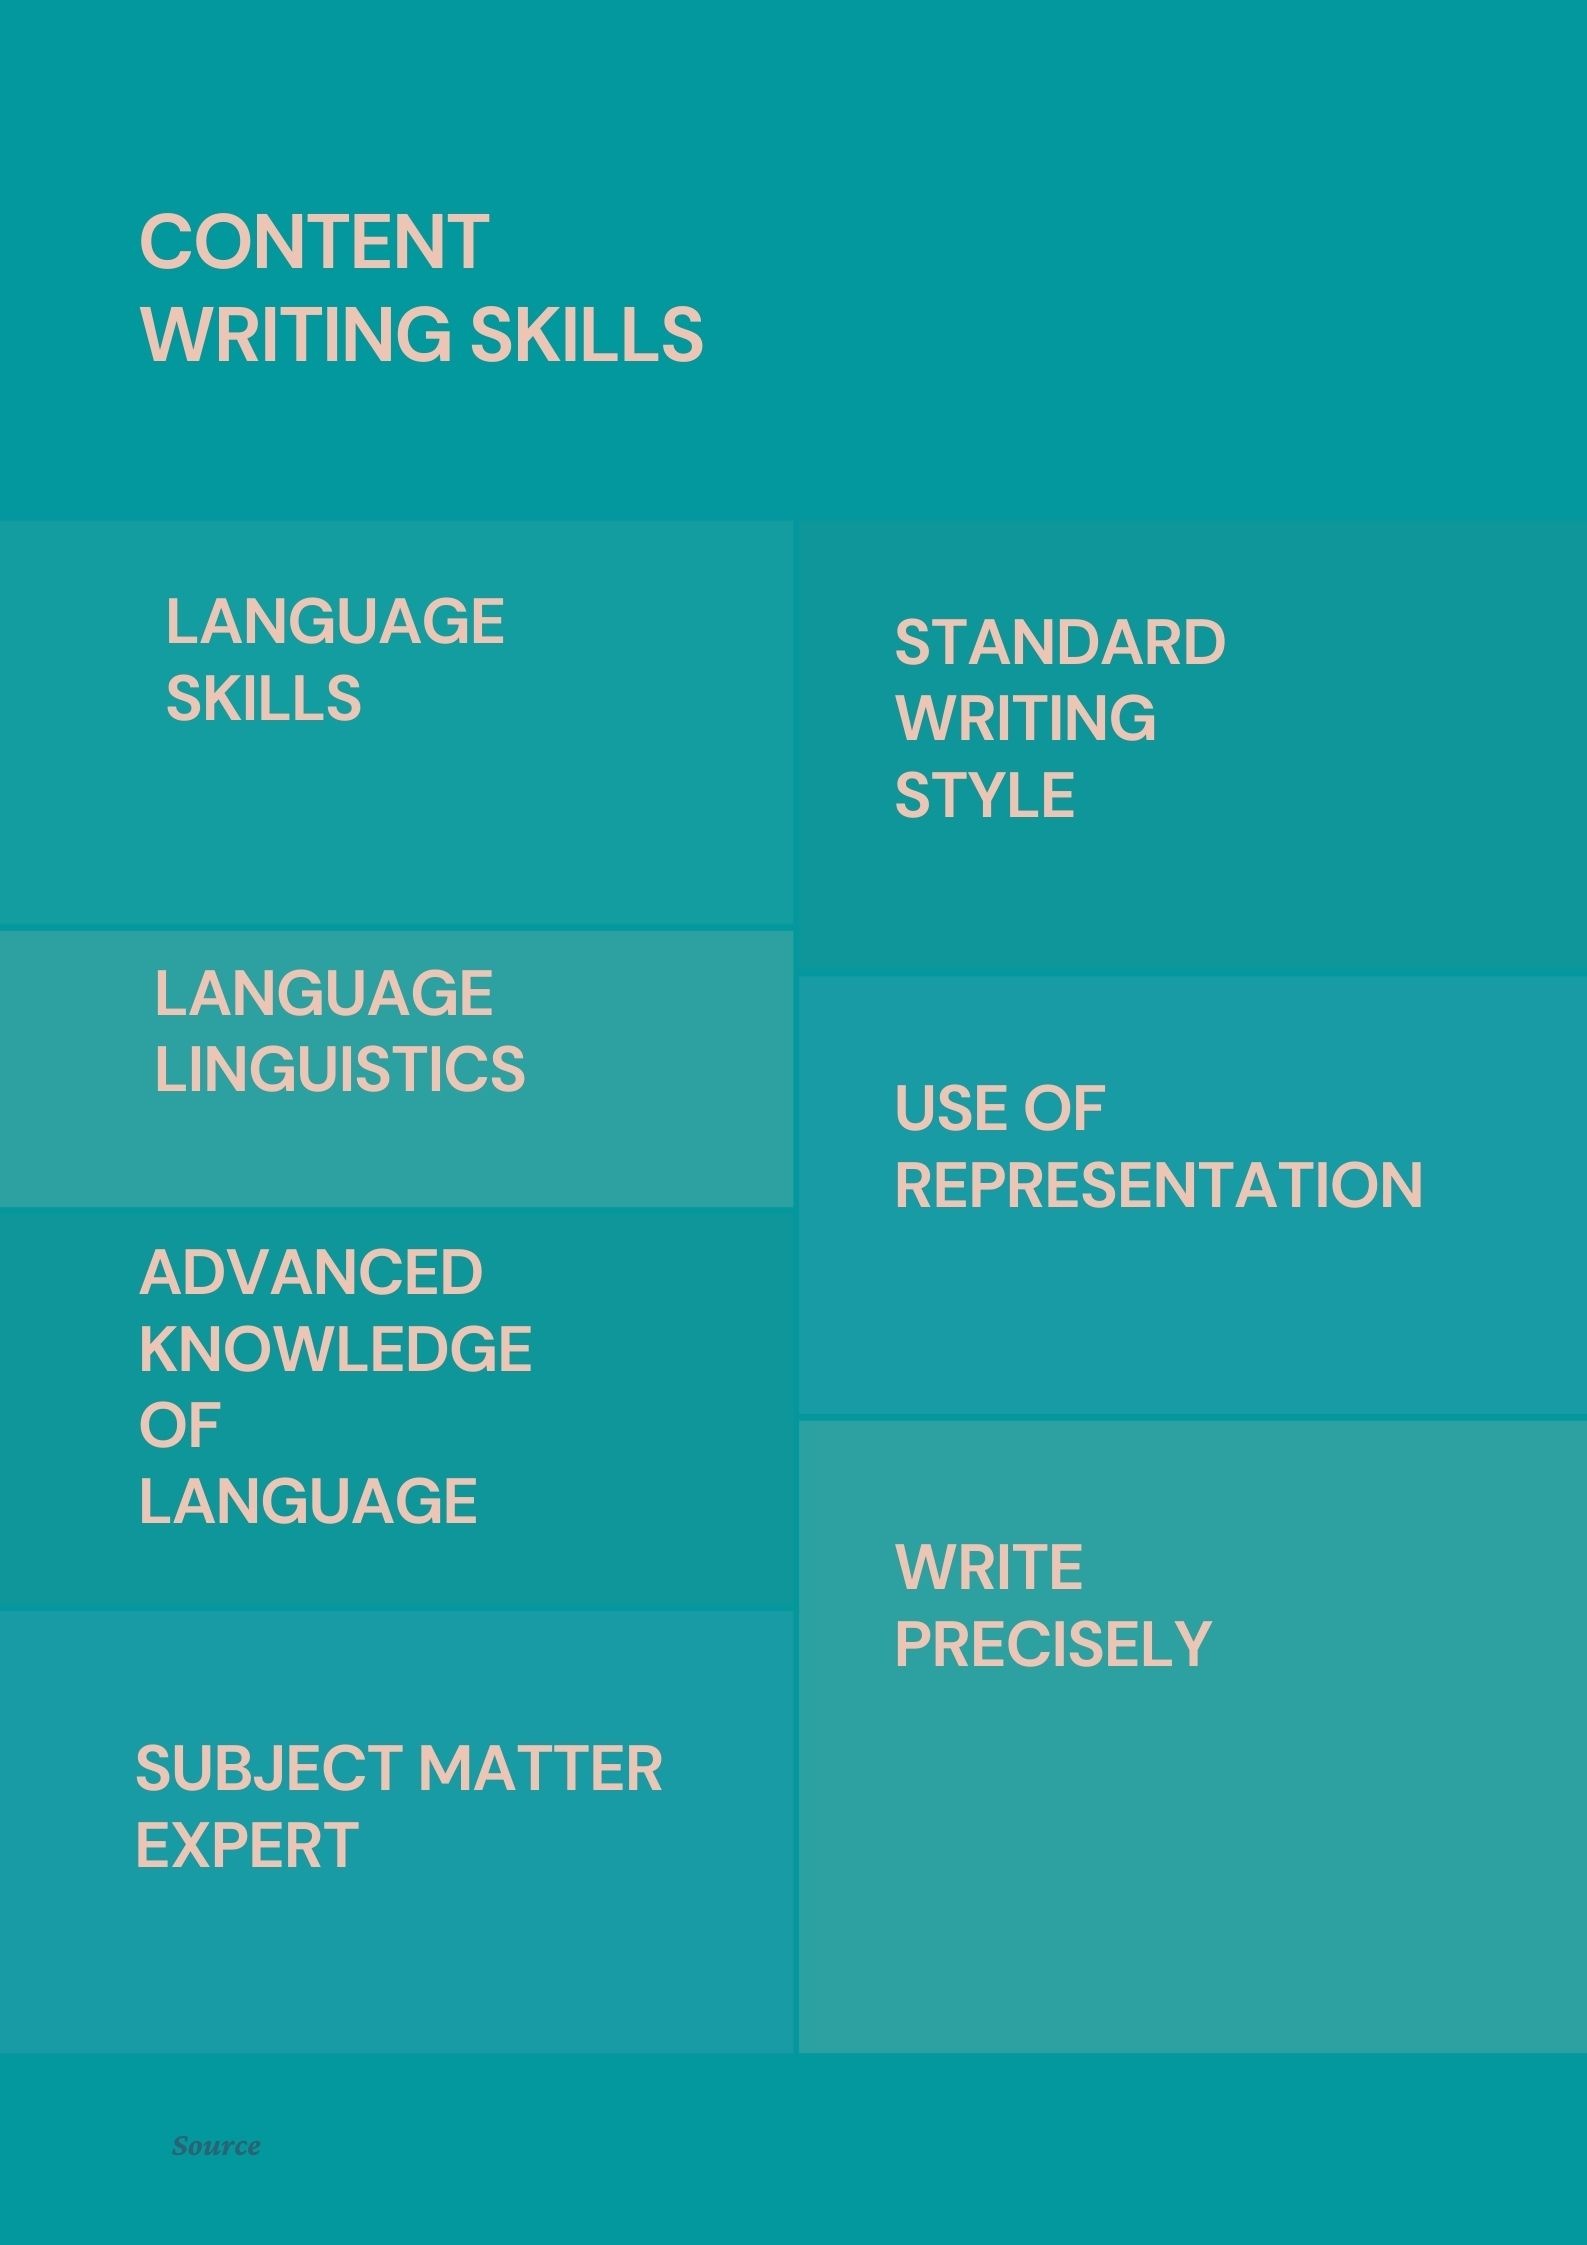 Effective content writing skills and implementation